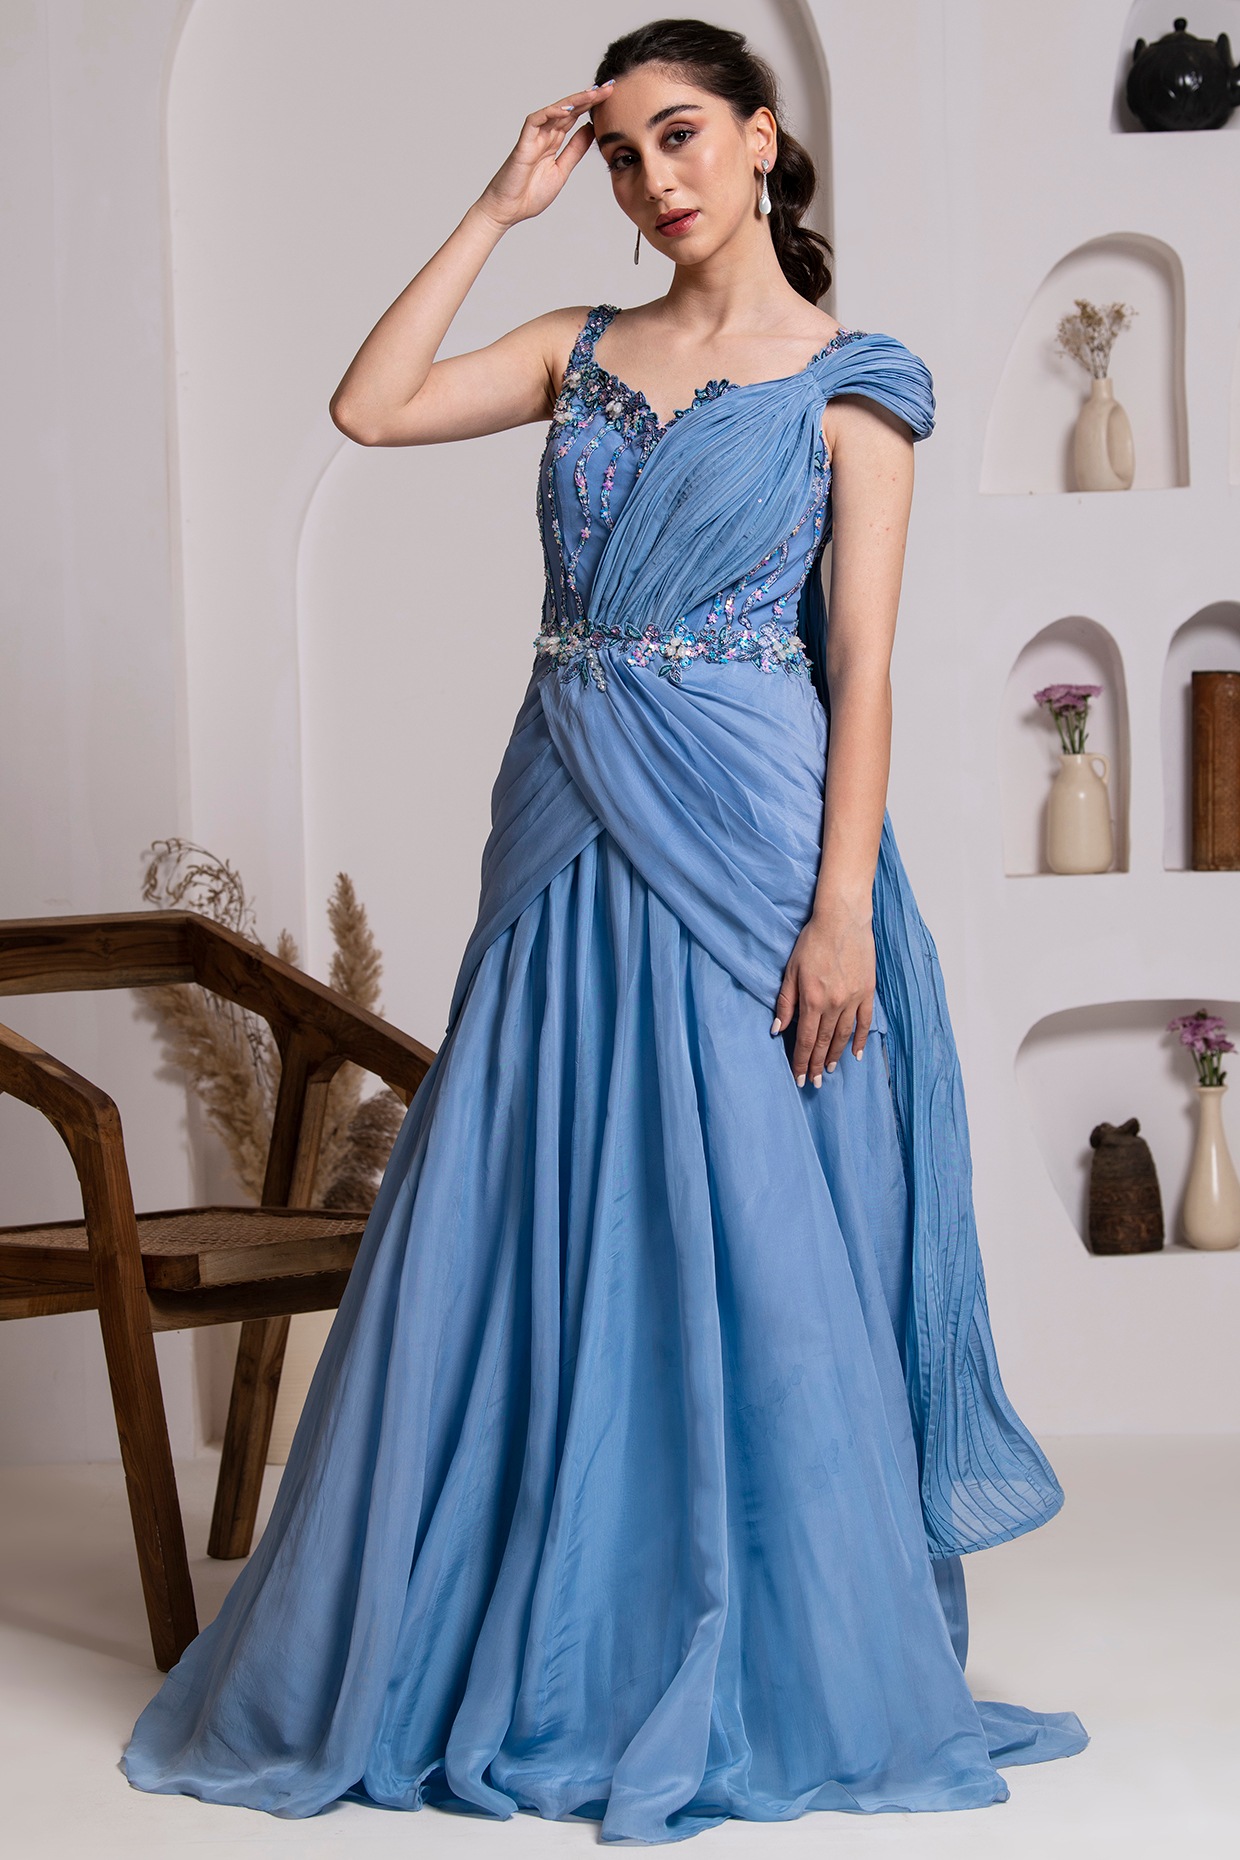 Indian Gowns Online | Buy Designer Evening Gowns | Andaazfashion.com.my